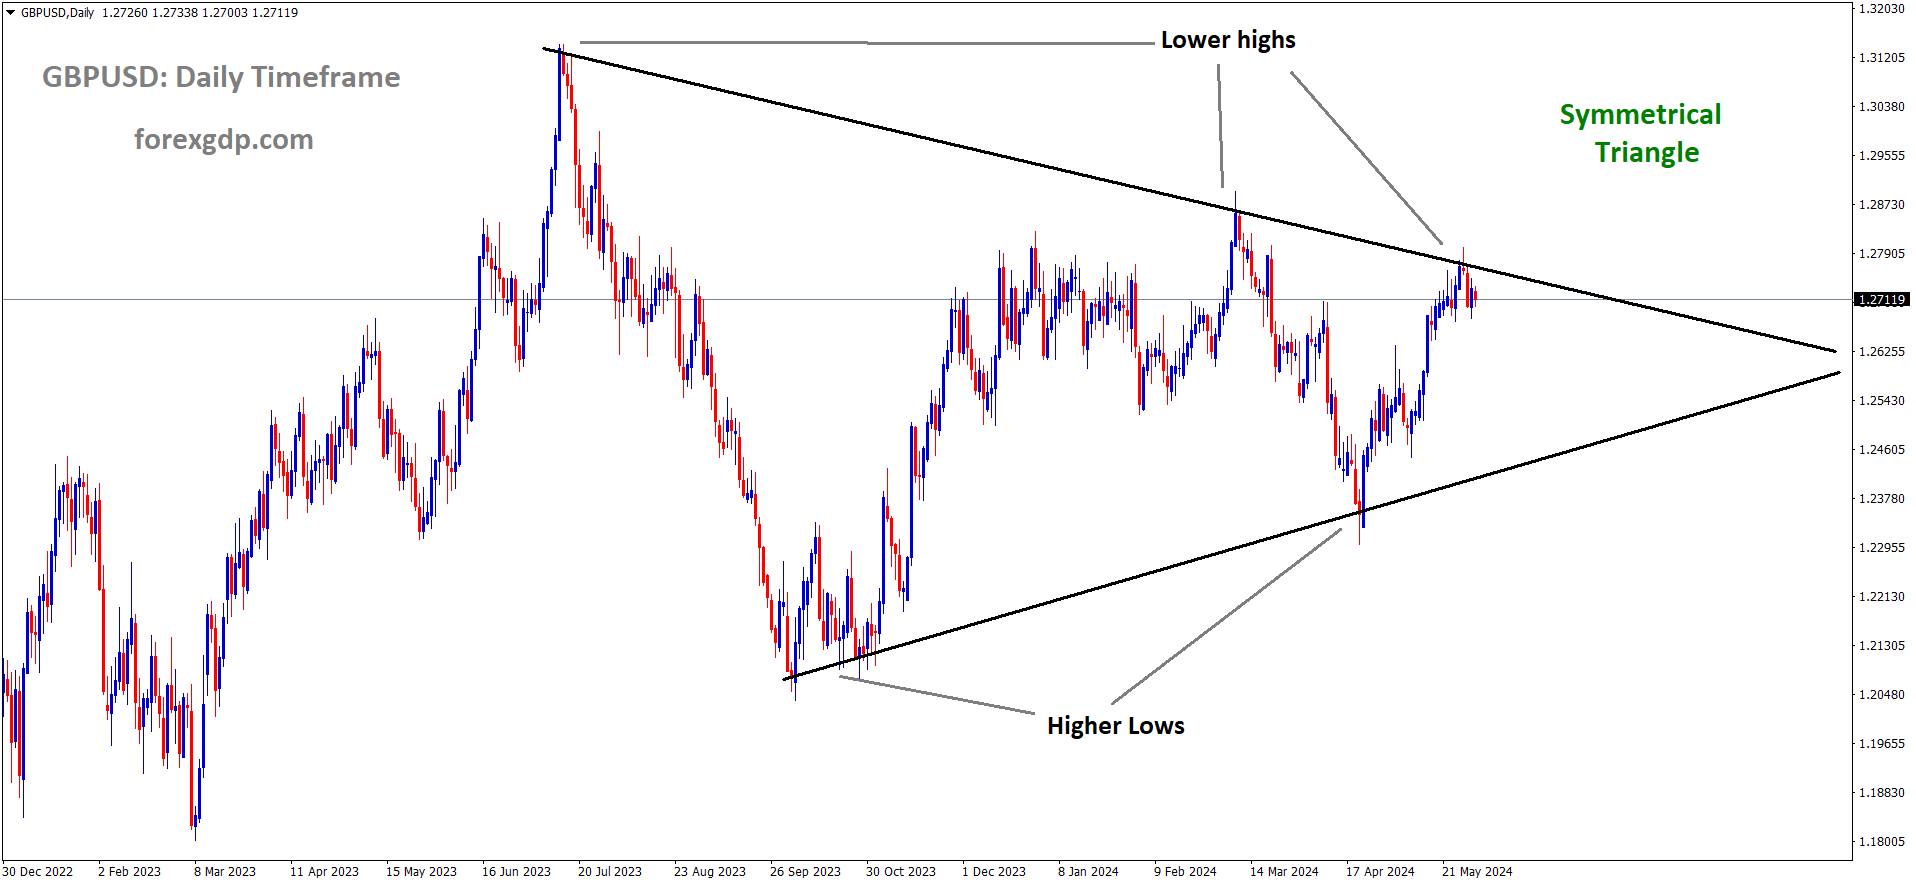 GBPUSD is moving in the Symmetrical triangle pattern and the market has fallen from the top area of the pattern